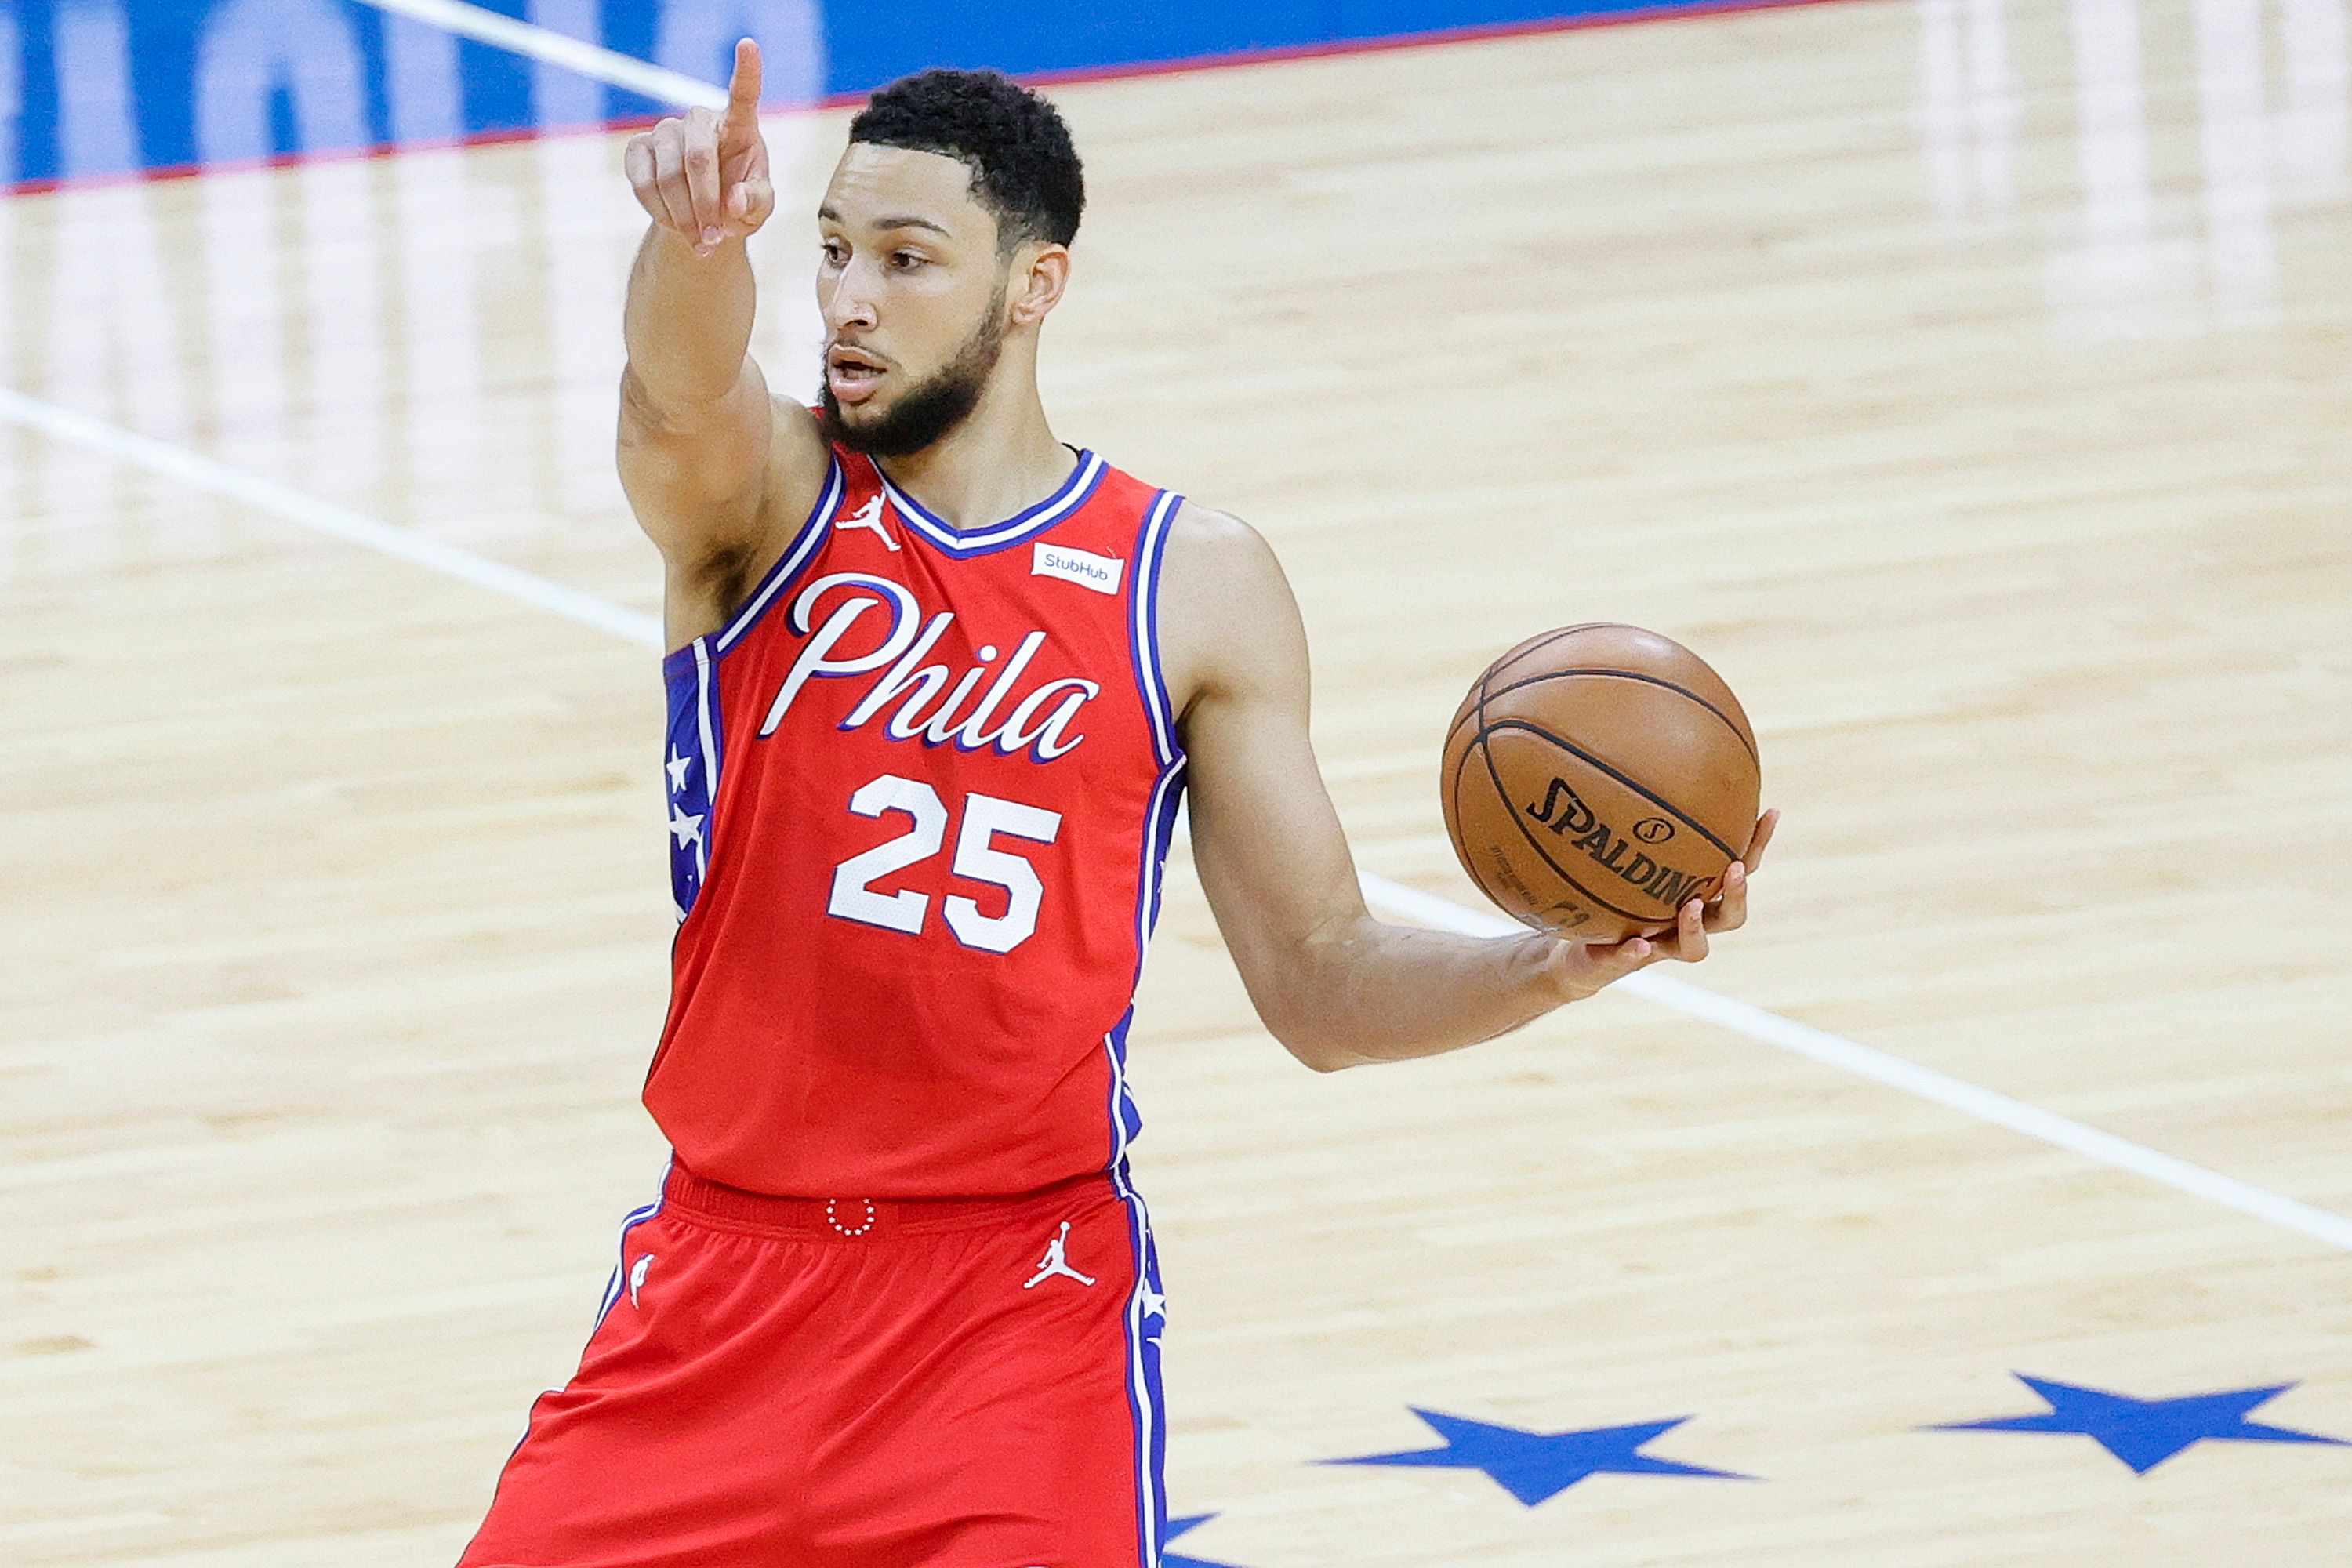 Ben Simmons making plays for the Sixers